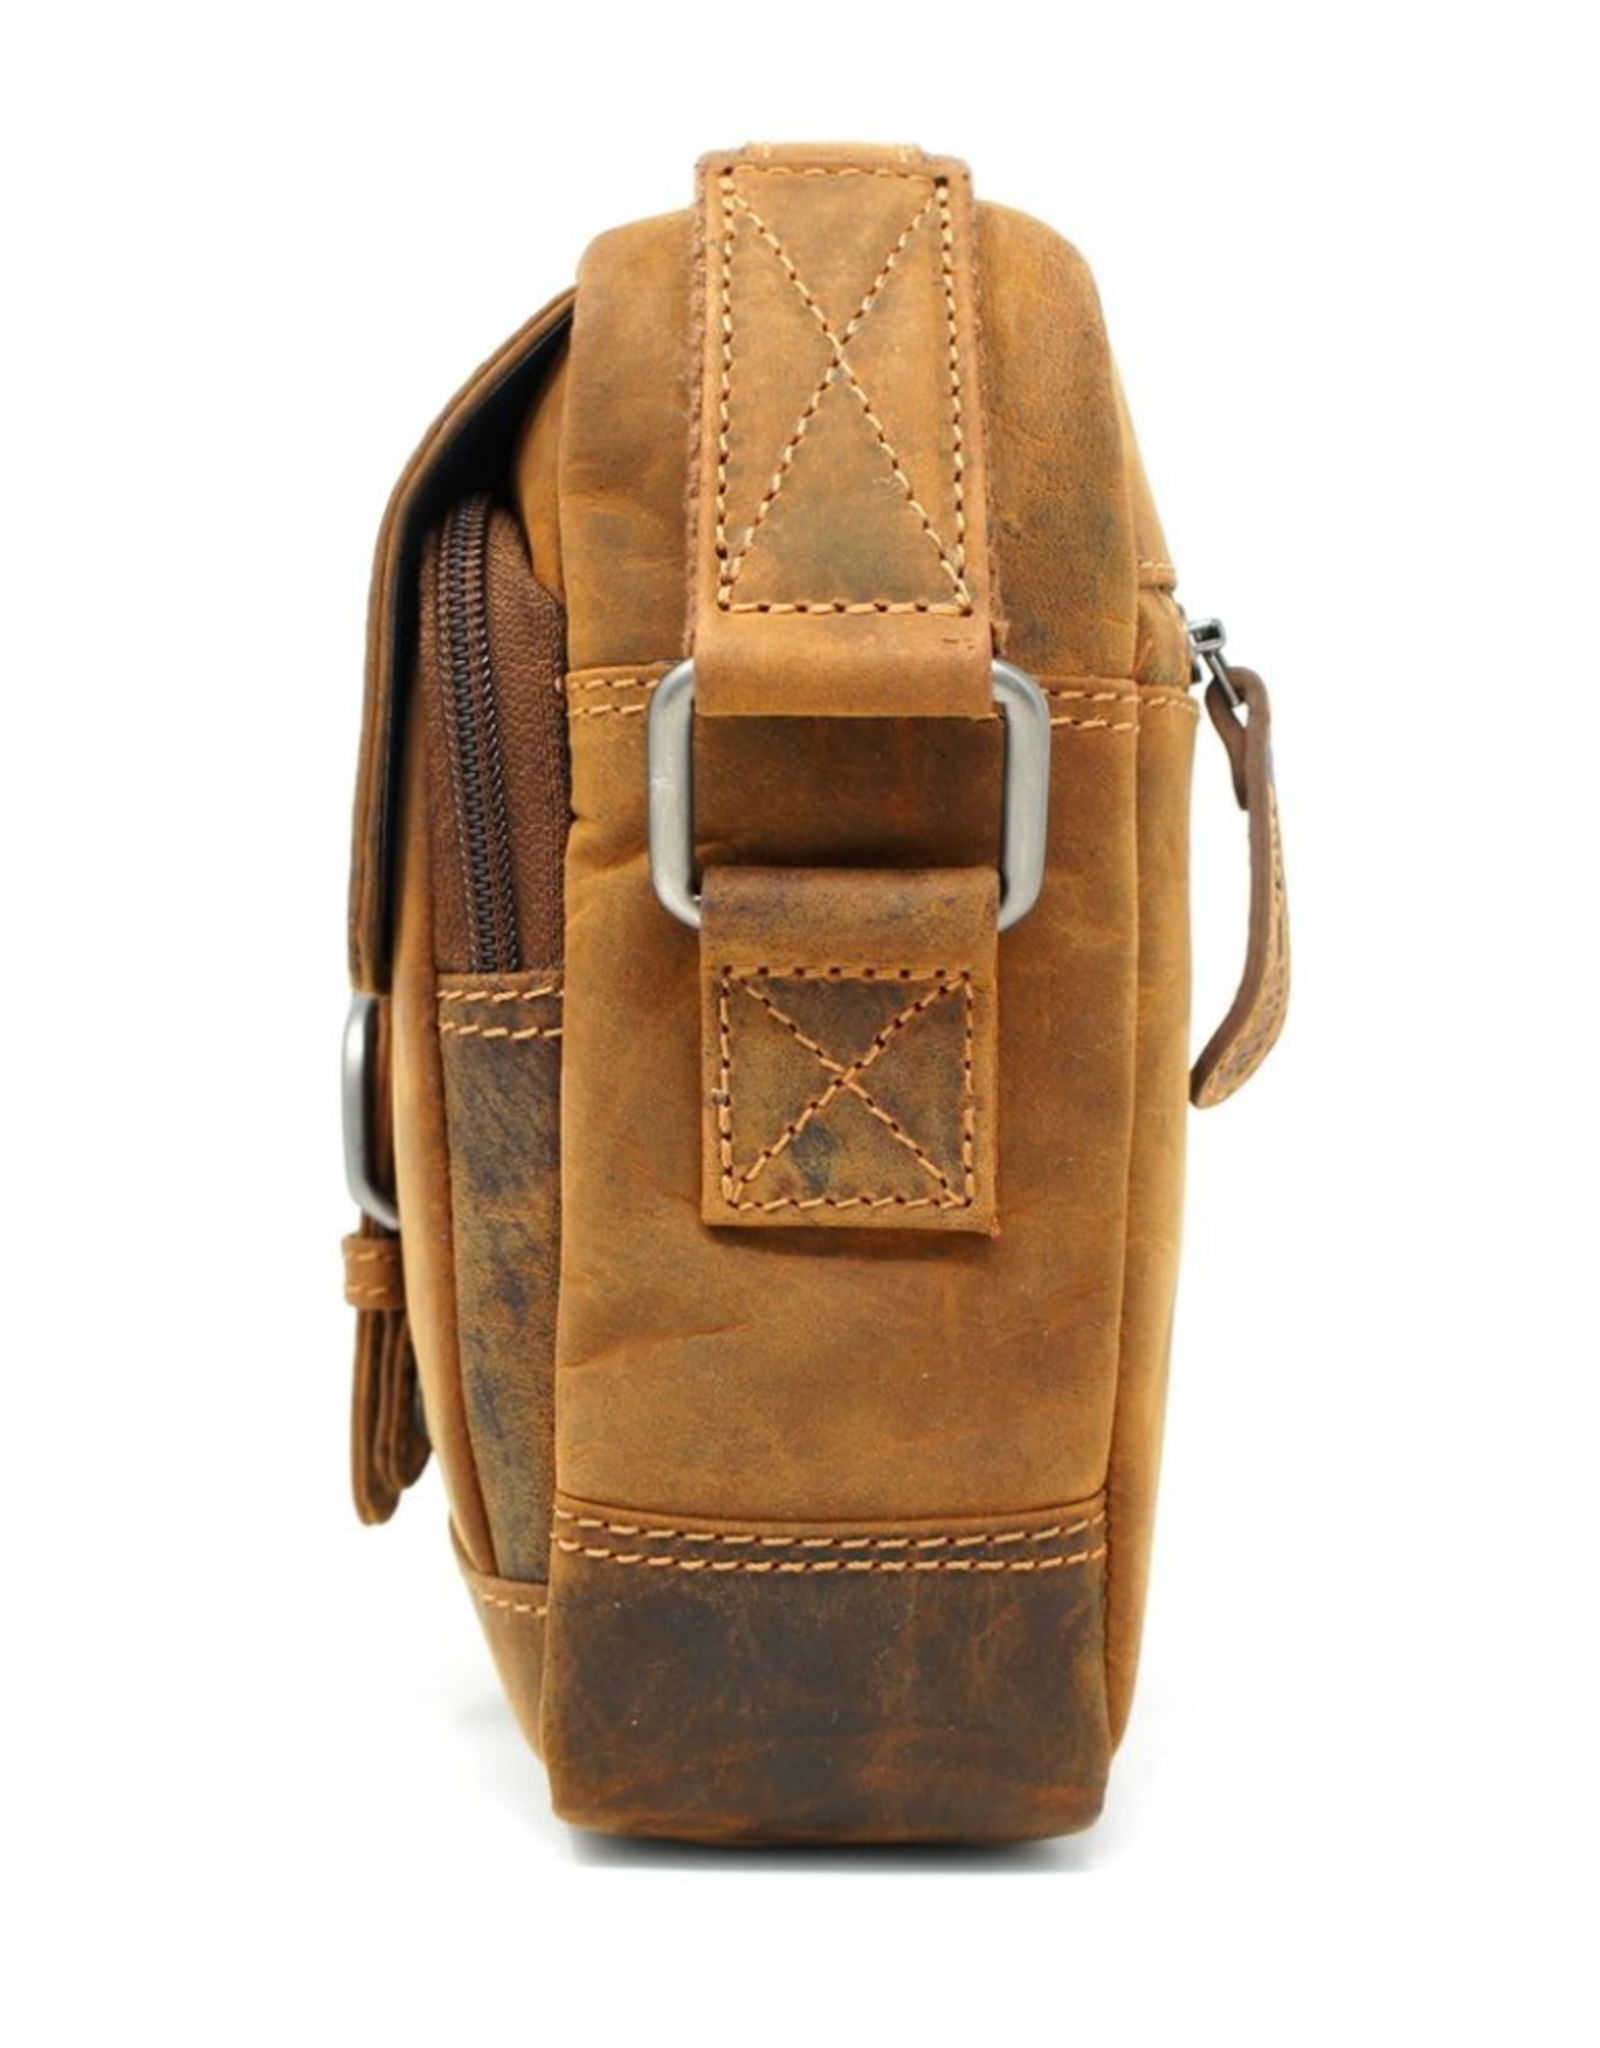 HillBurry Leather bags - HillBurry Leather Shoulder bag HT-05 small MT